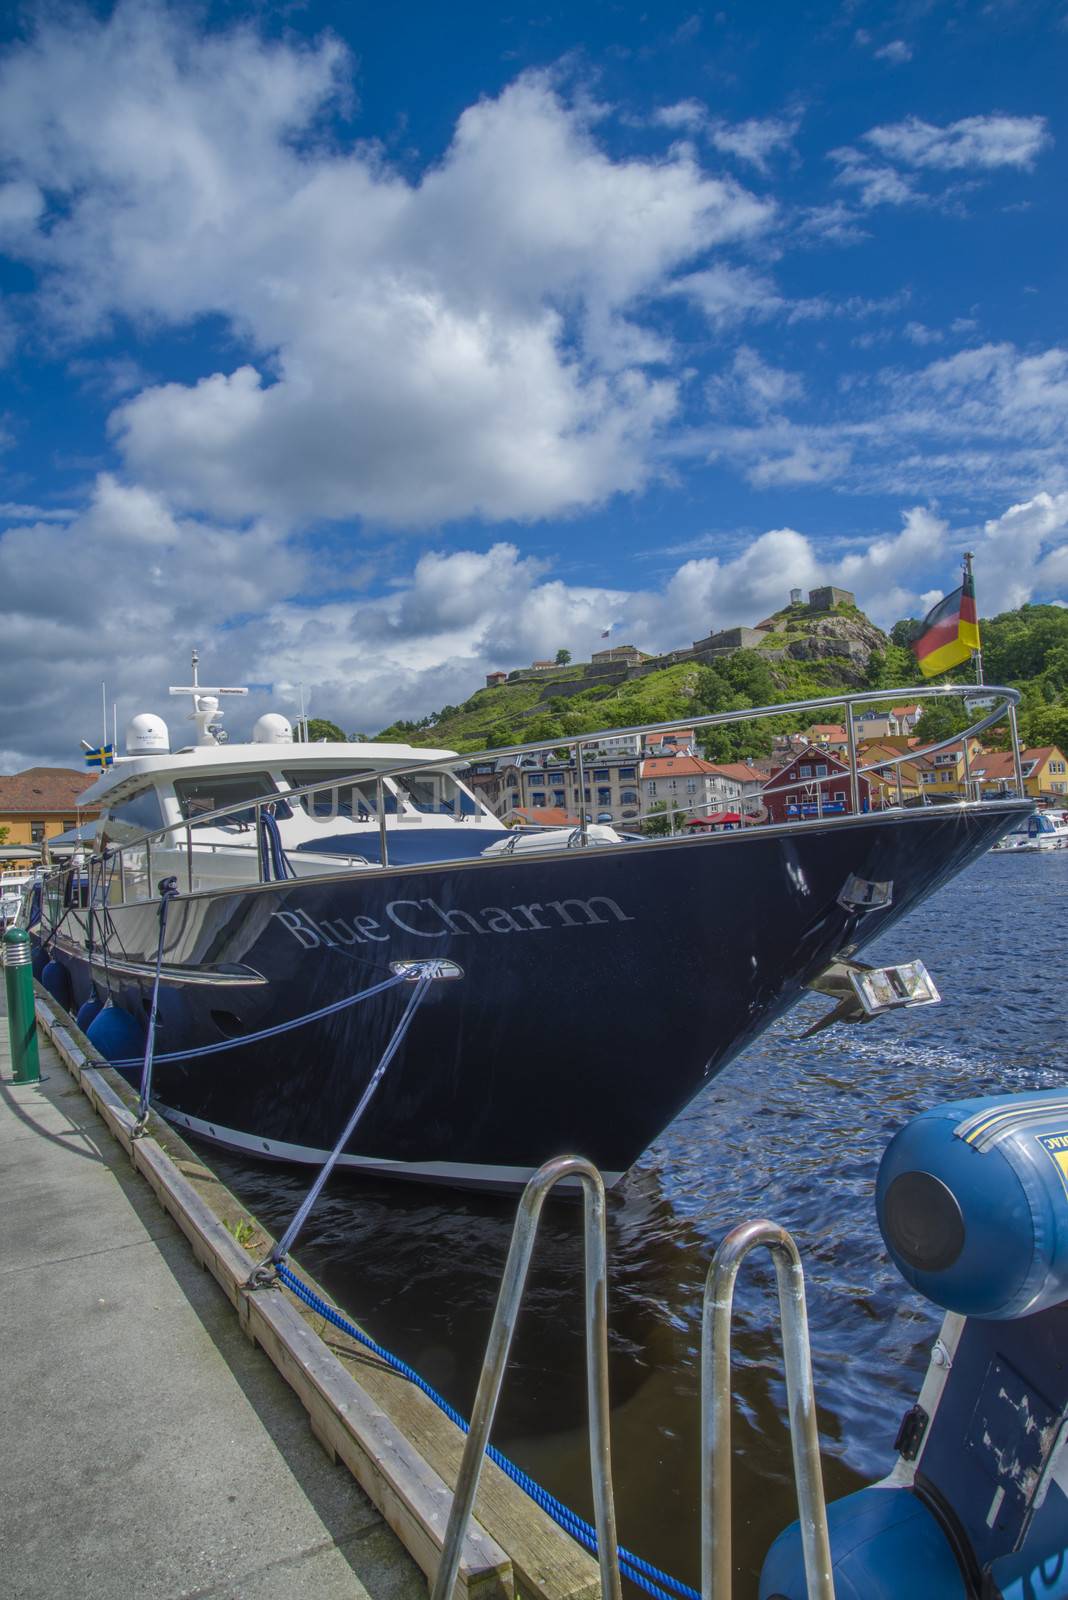 Wim Van der Valk Yachts Continental Yachts, built in the Netherlands, the ship has a German flag and is moored to the quay in the port of Halden, Norway.